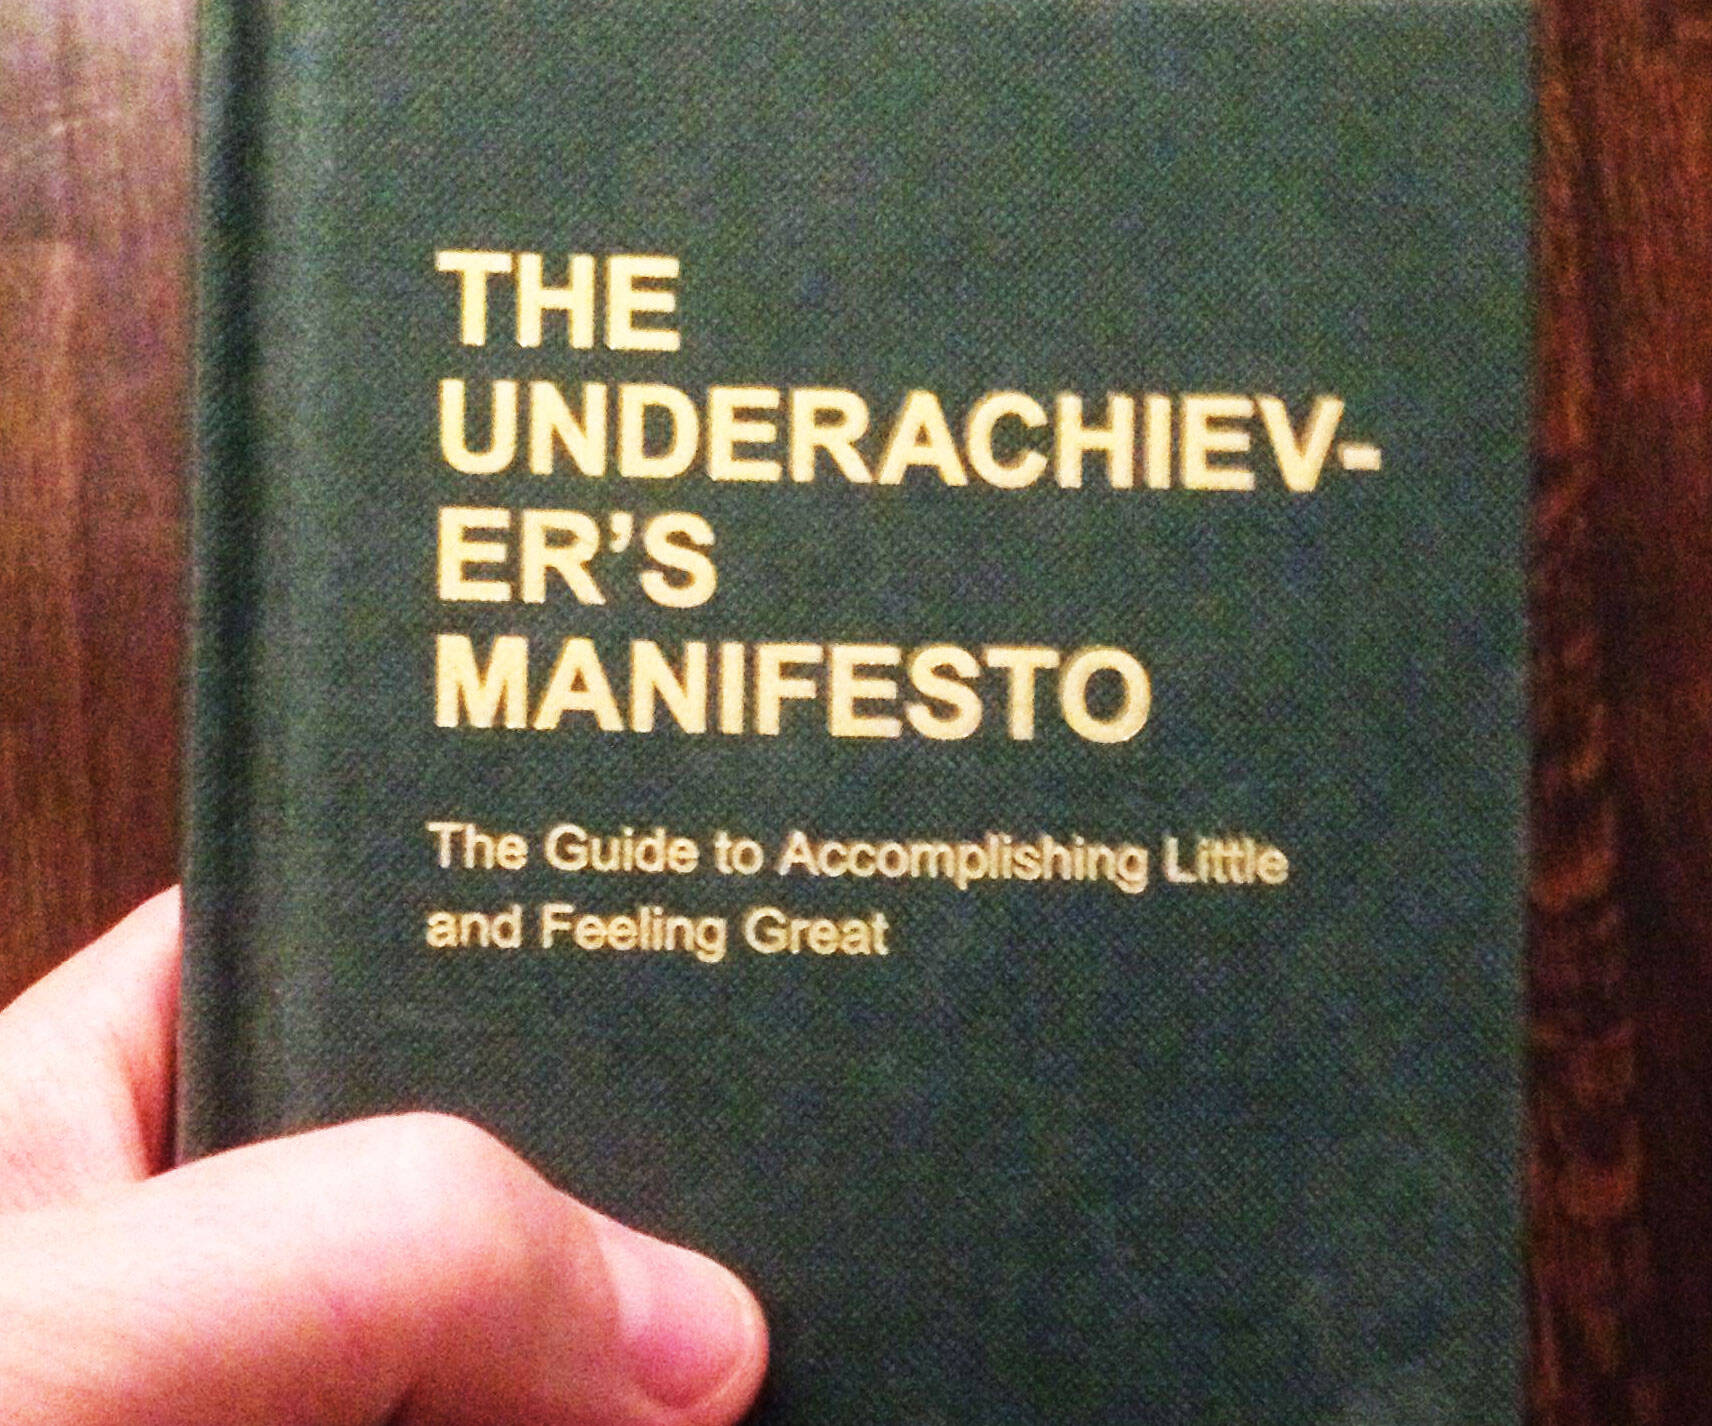 The Underachiever's Manifesto - //coolthings.us